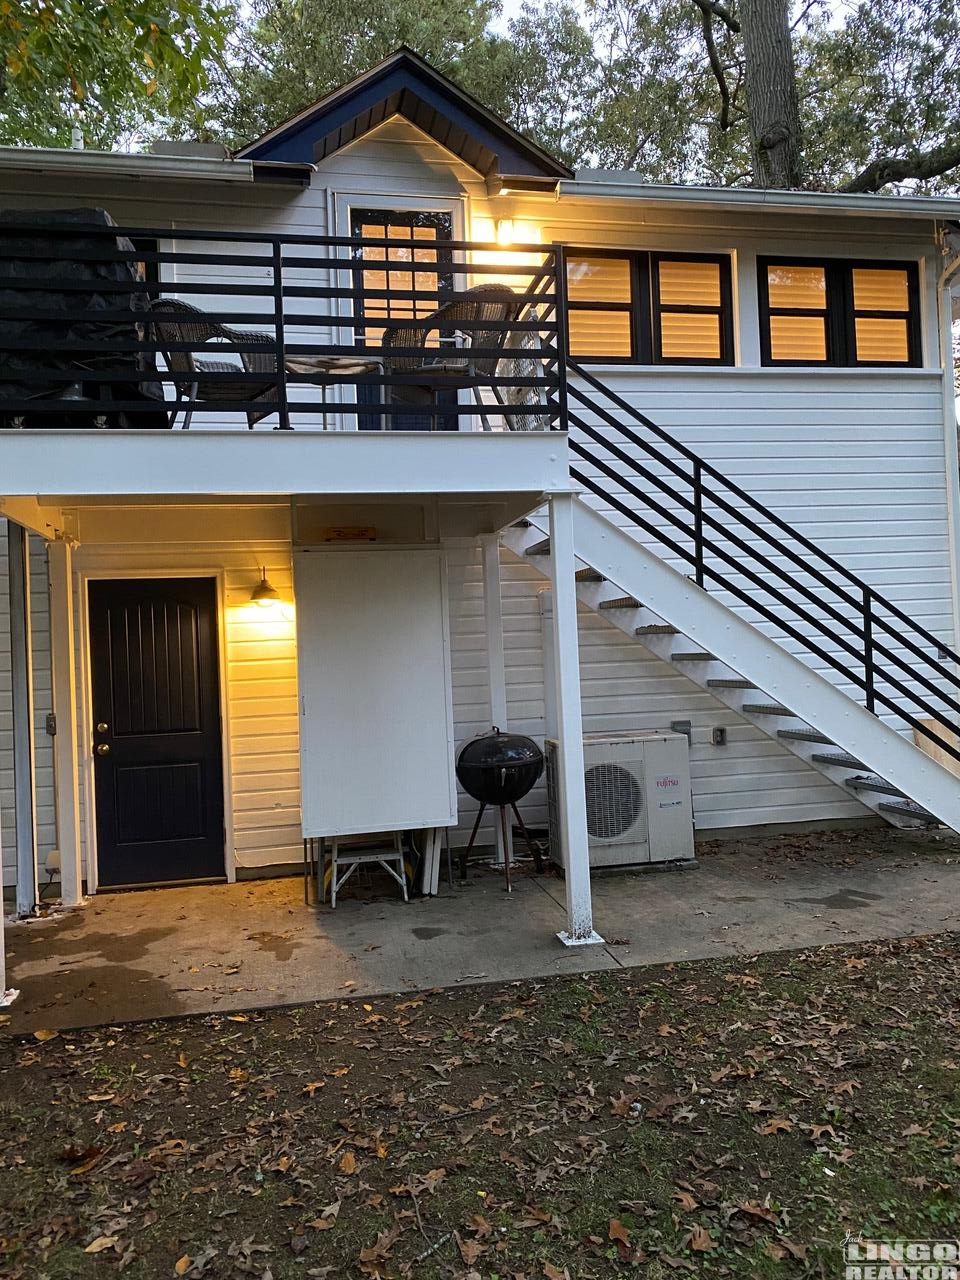 11bext Delaware Beach Vacation Rentals - Results from #700